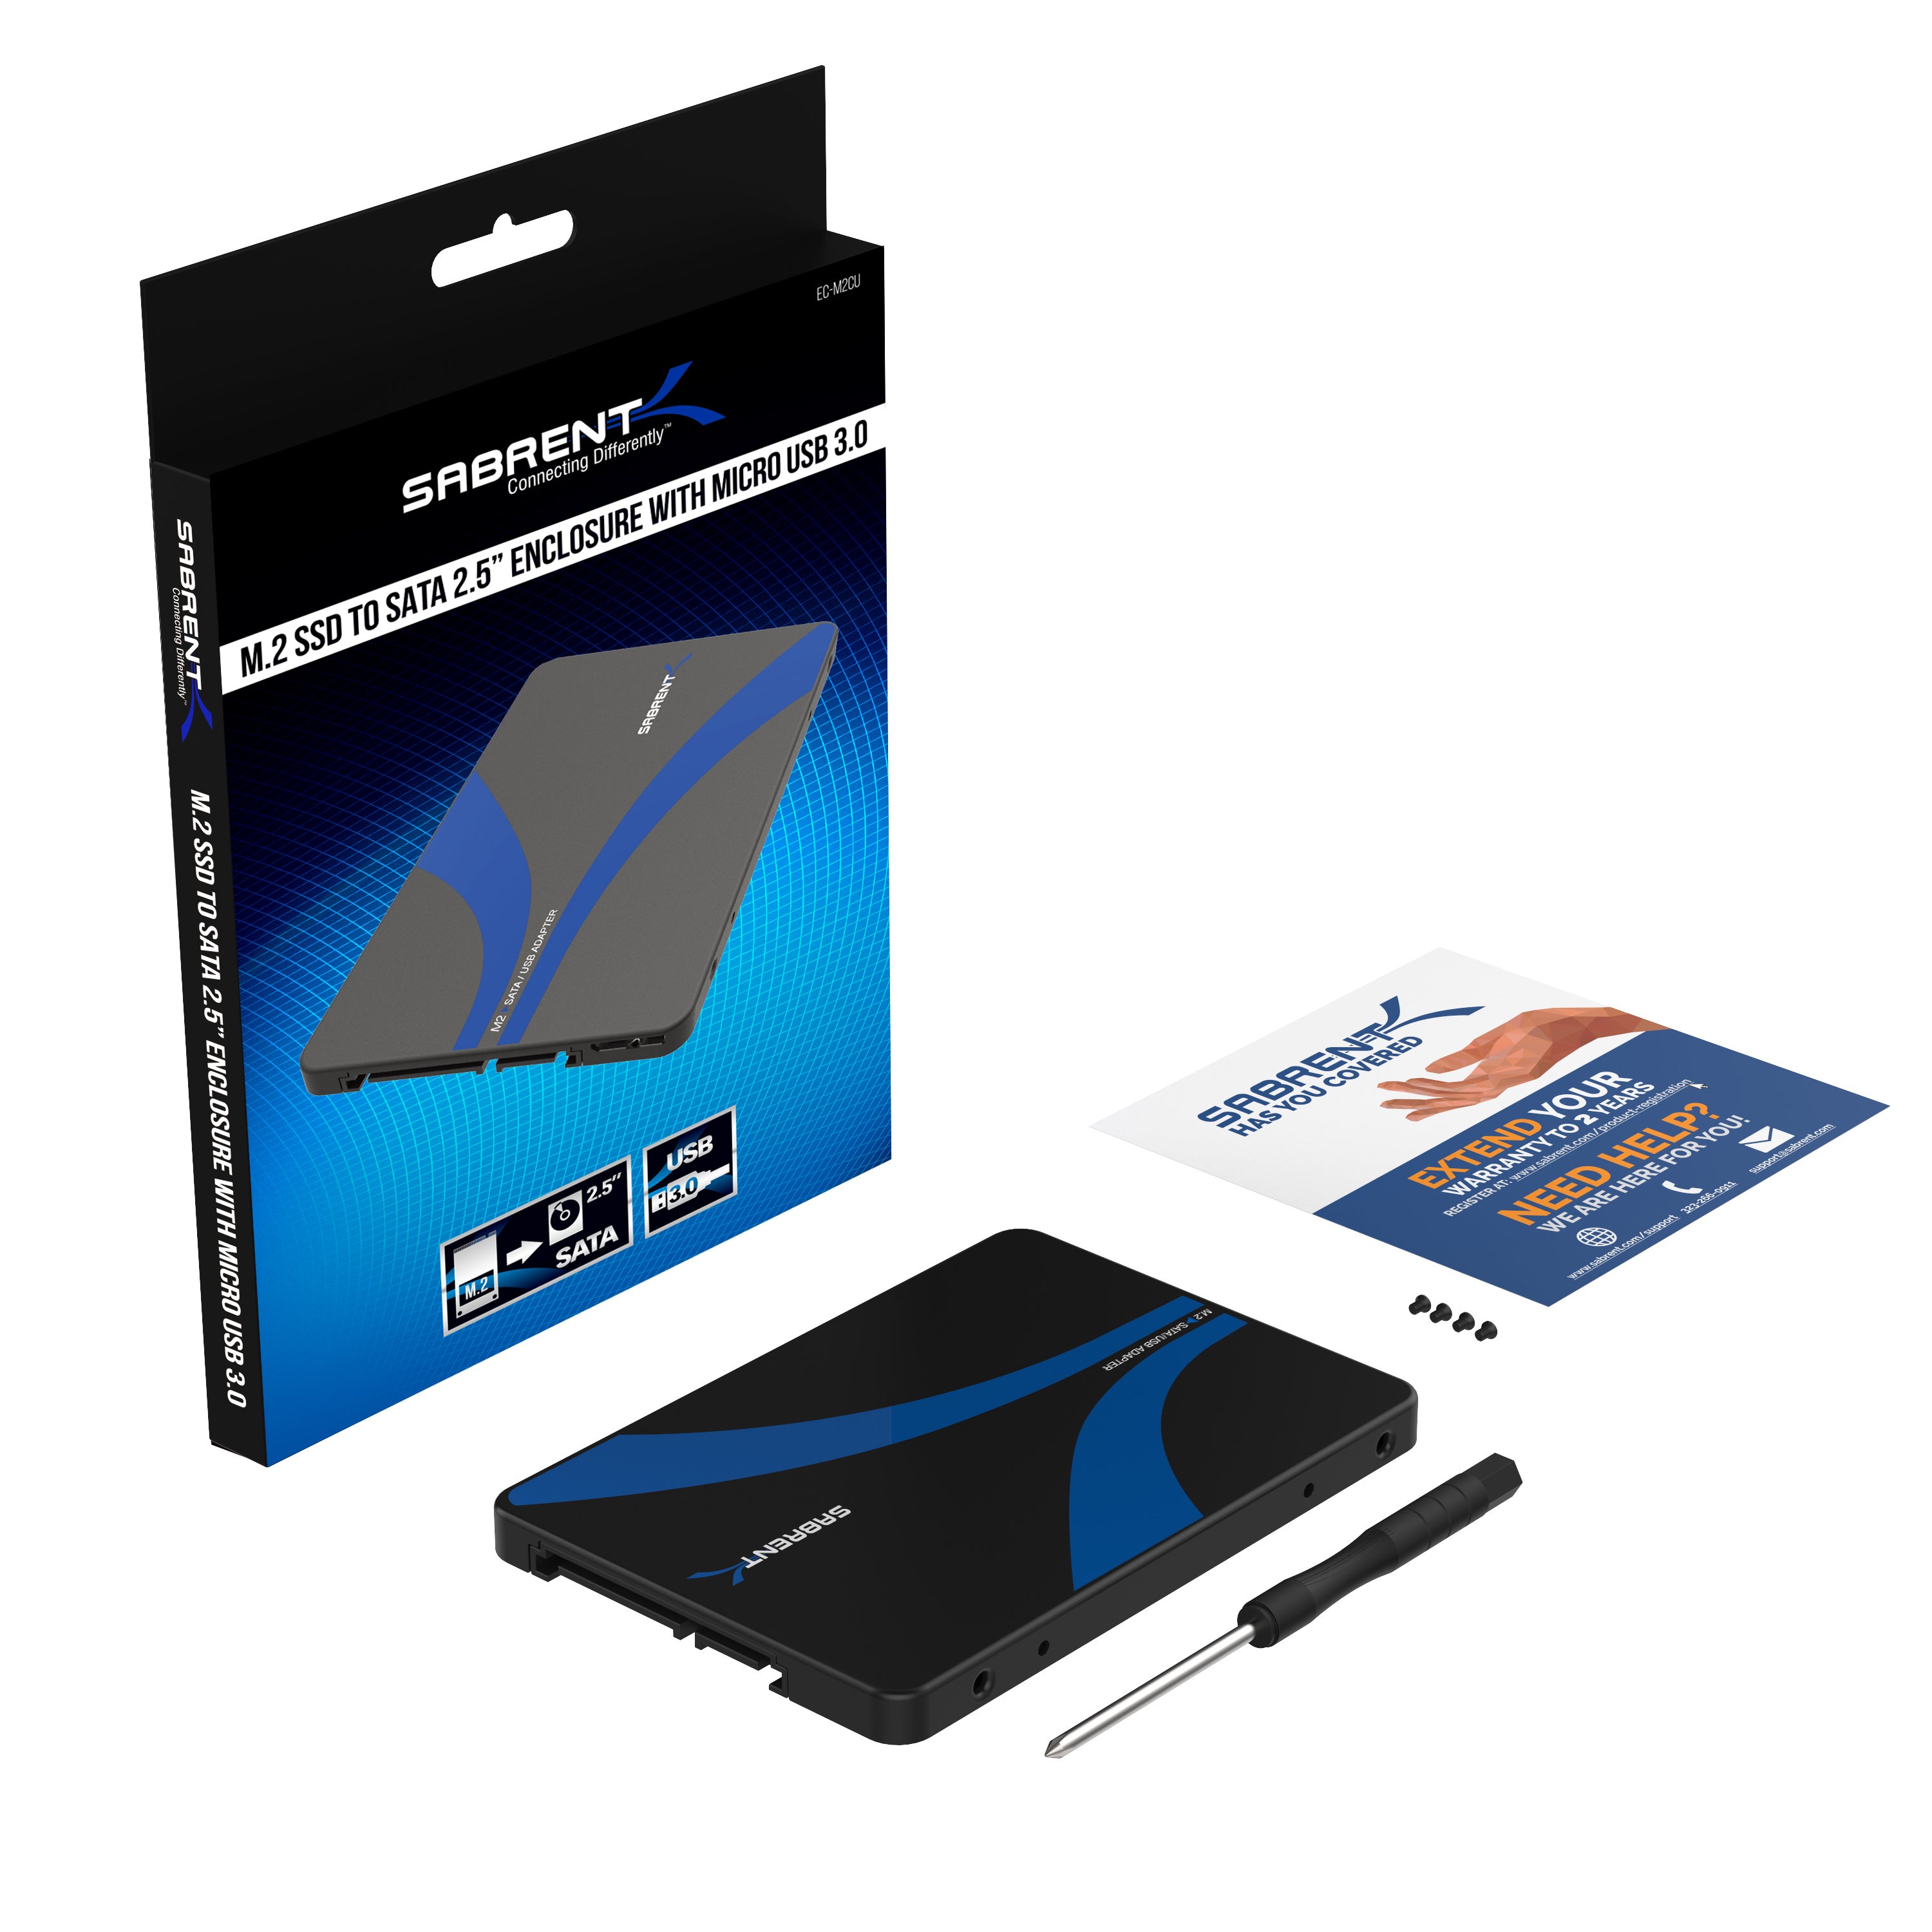 M.2 SSD to 2.5in SATA III Adapter - M.2 Solid State Drive Converter with  Protective Housing